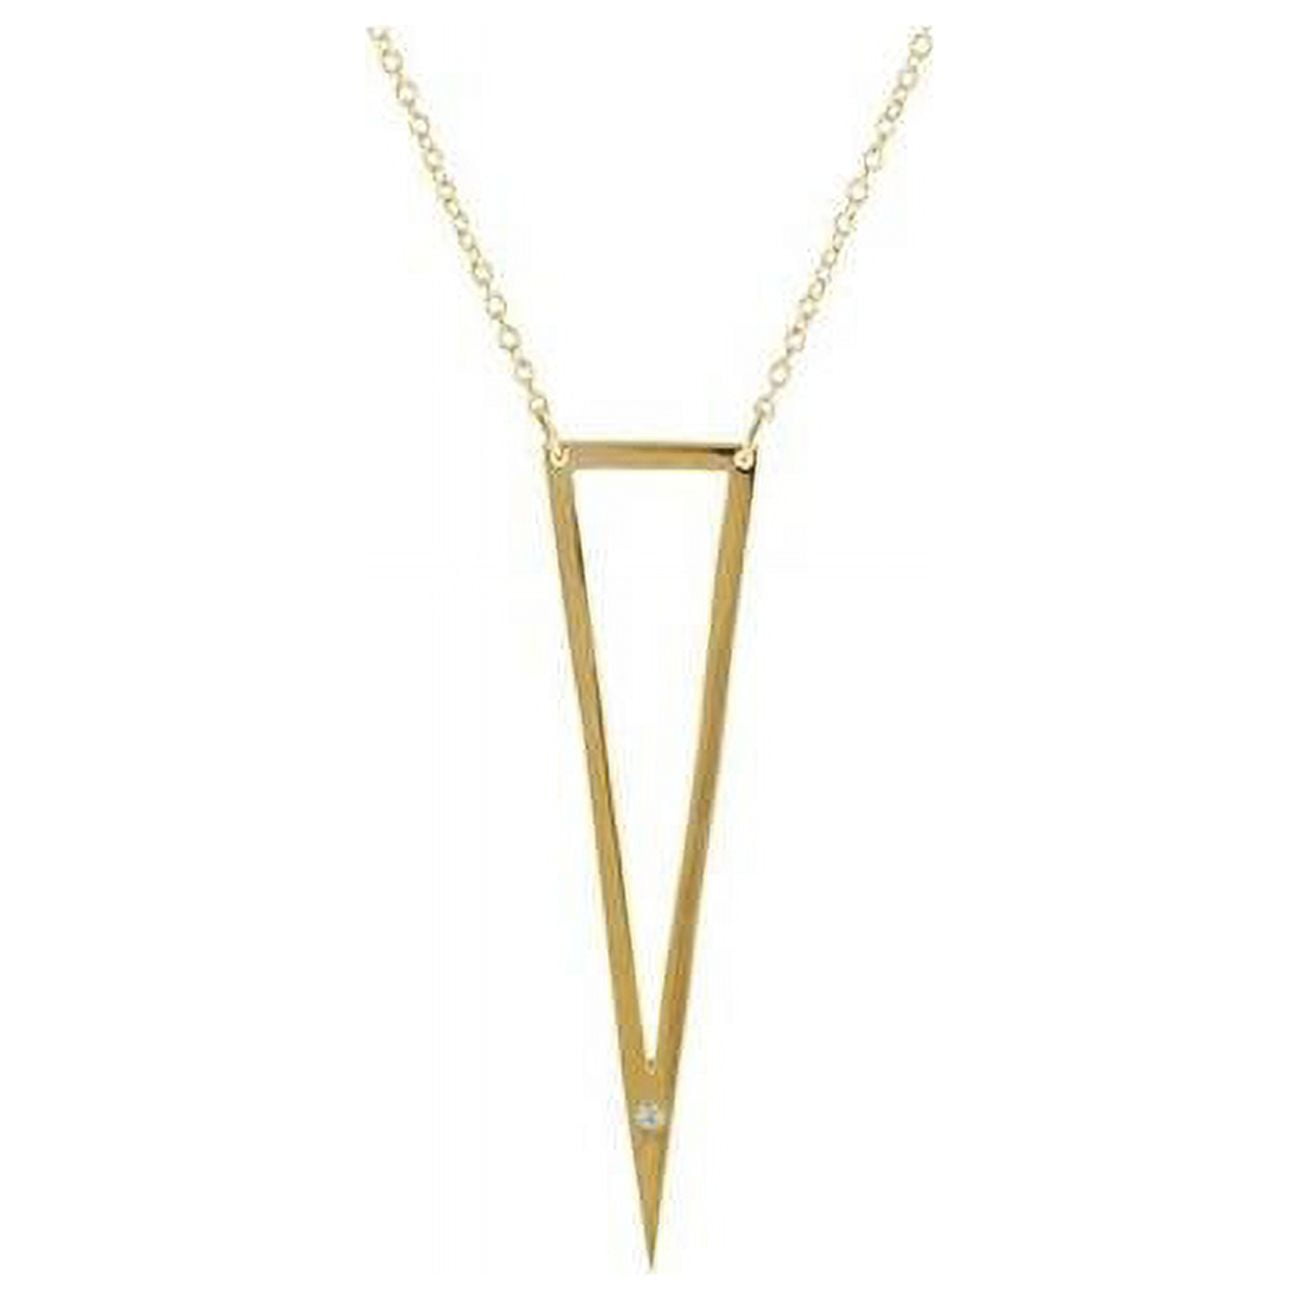 Je1127g 16 In. Plus 2 In. Extension Silver Gold Plated Open Triangle 2 In. & Cubic Zirconia Pendant Necklace